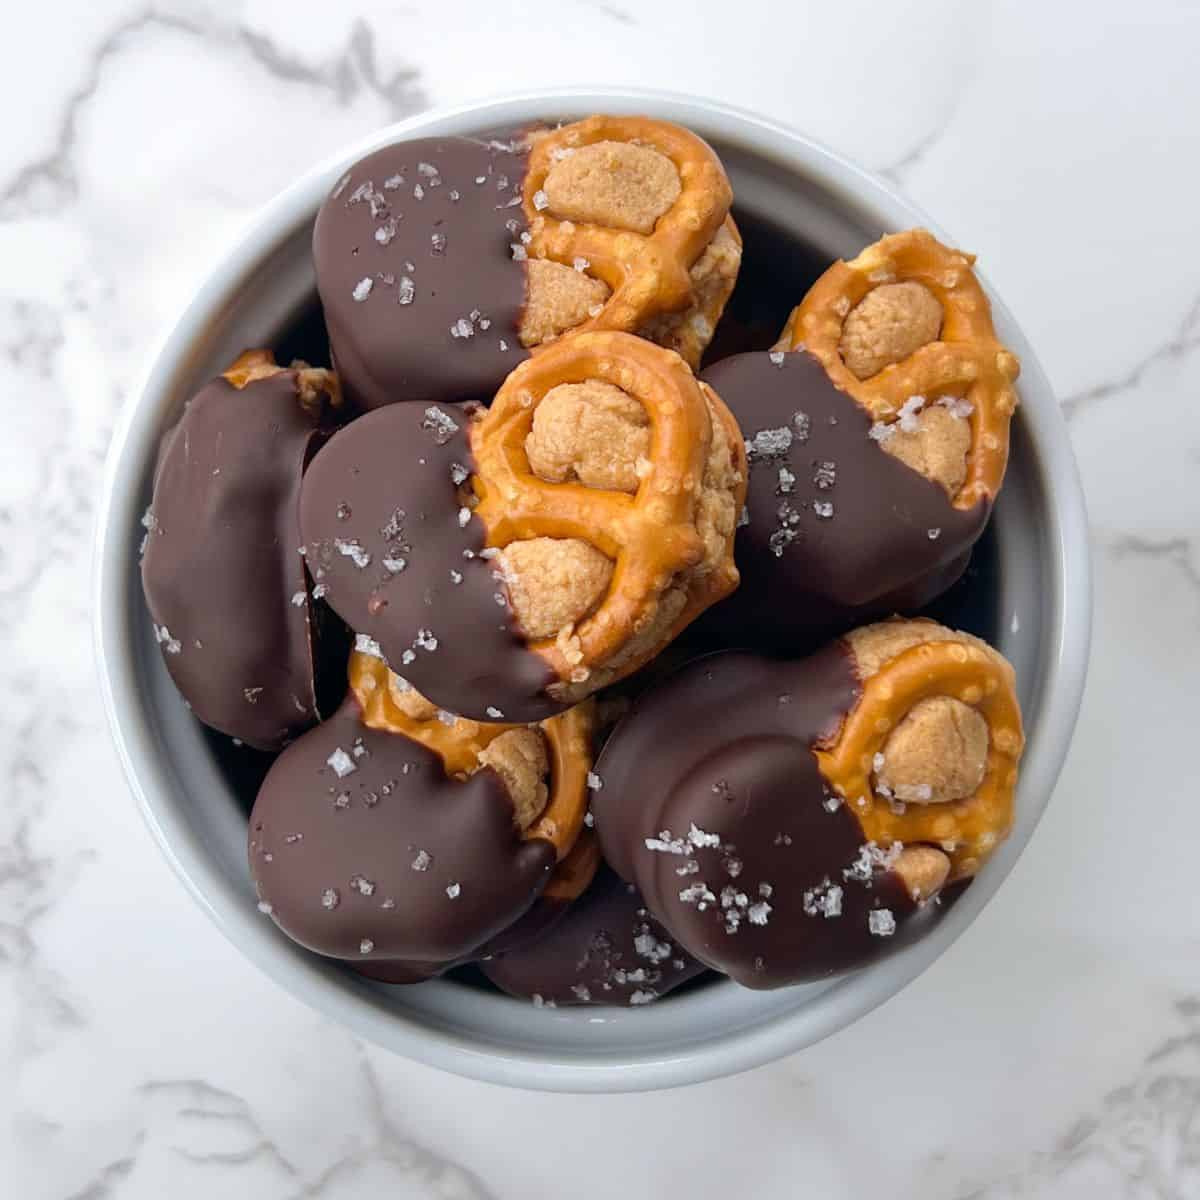 Dark chocolate covered pretzels stuffed with peanut butter in a serving bowl